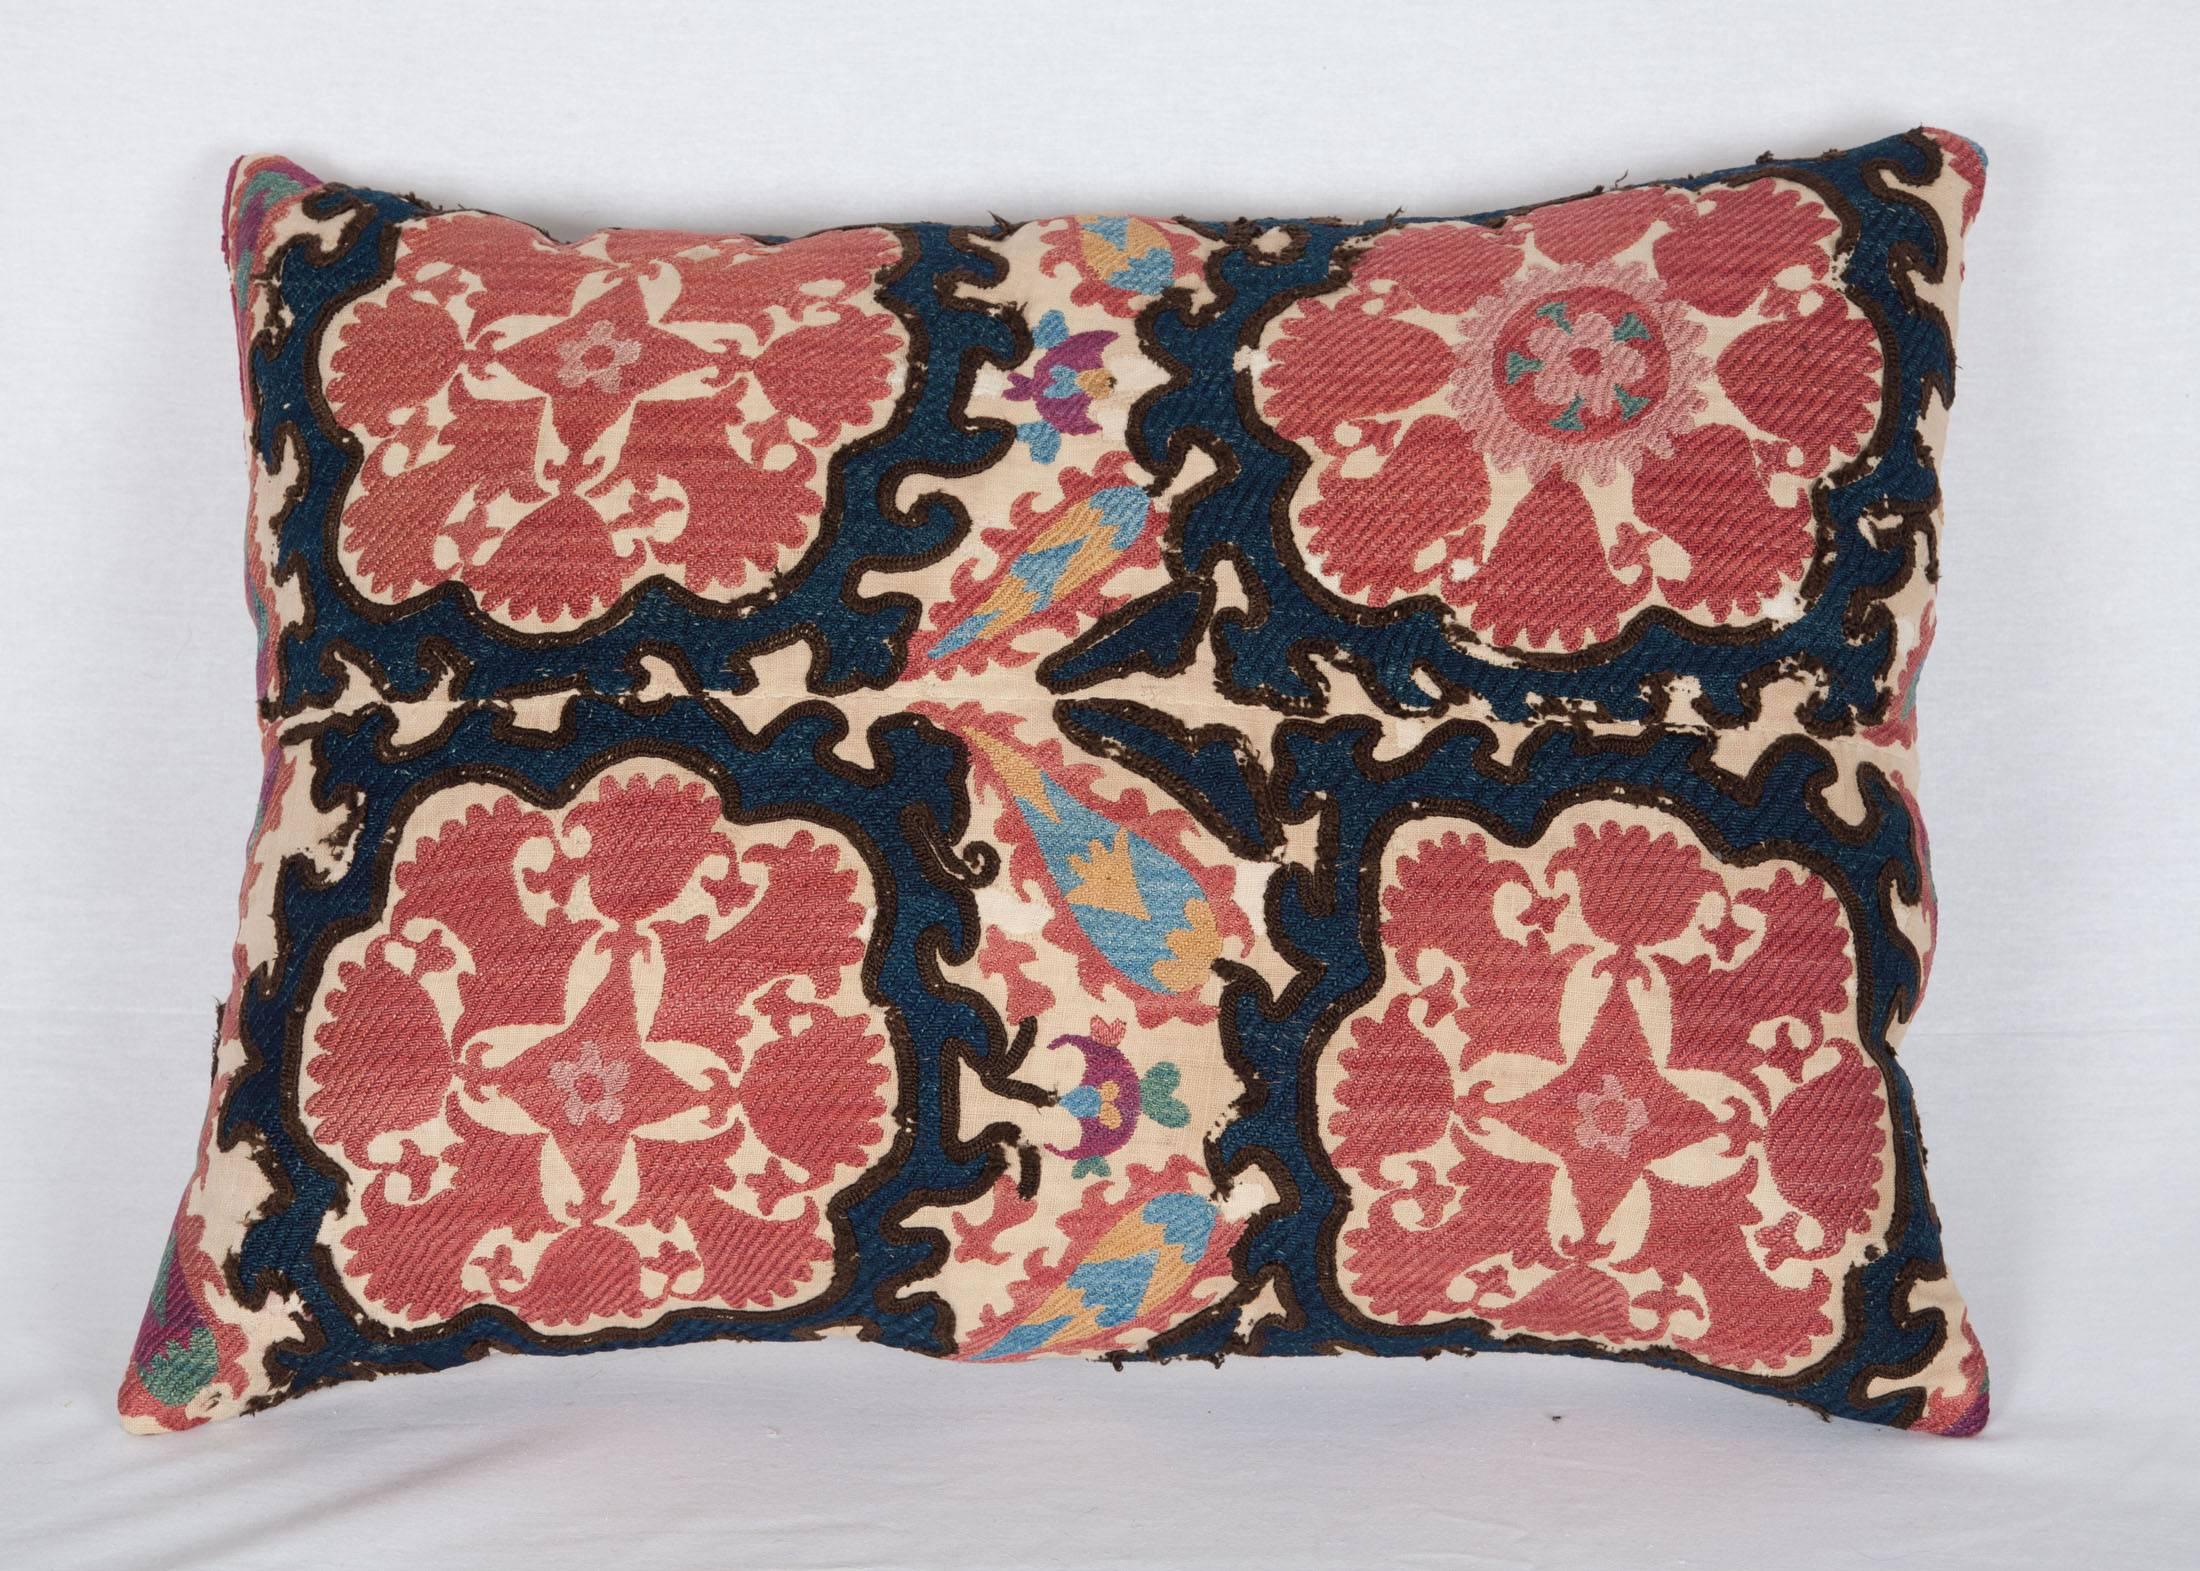 The pillow is made out of a late 19th Century Tadjik Suzani.
It does not come with an insert but it comes with a bag made to the size and out of cotton to accommodate the filling .
The backing is made of linen.

Please Note FILLING IS NOT